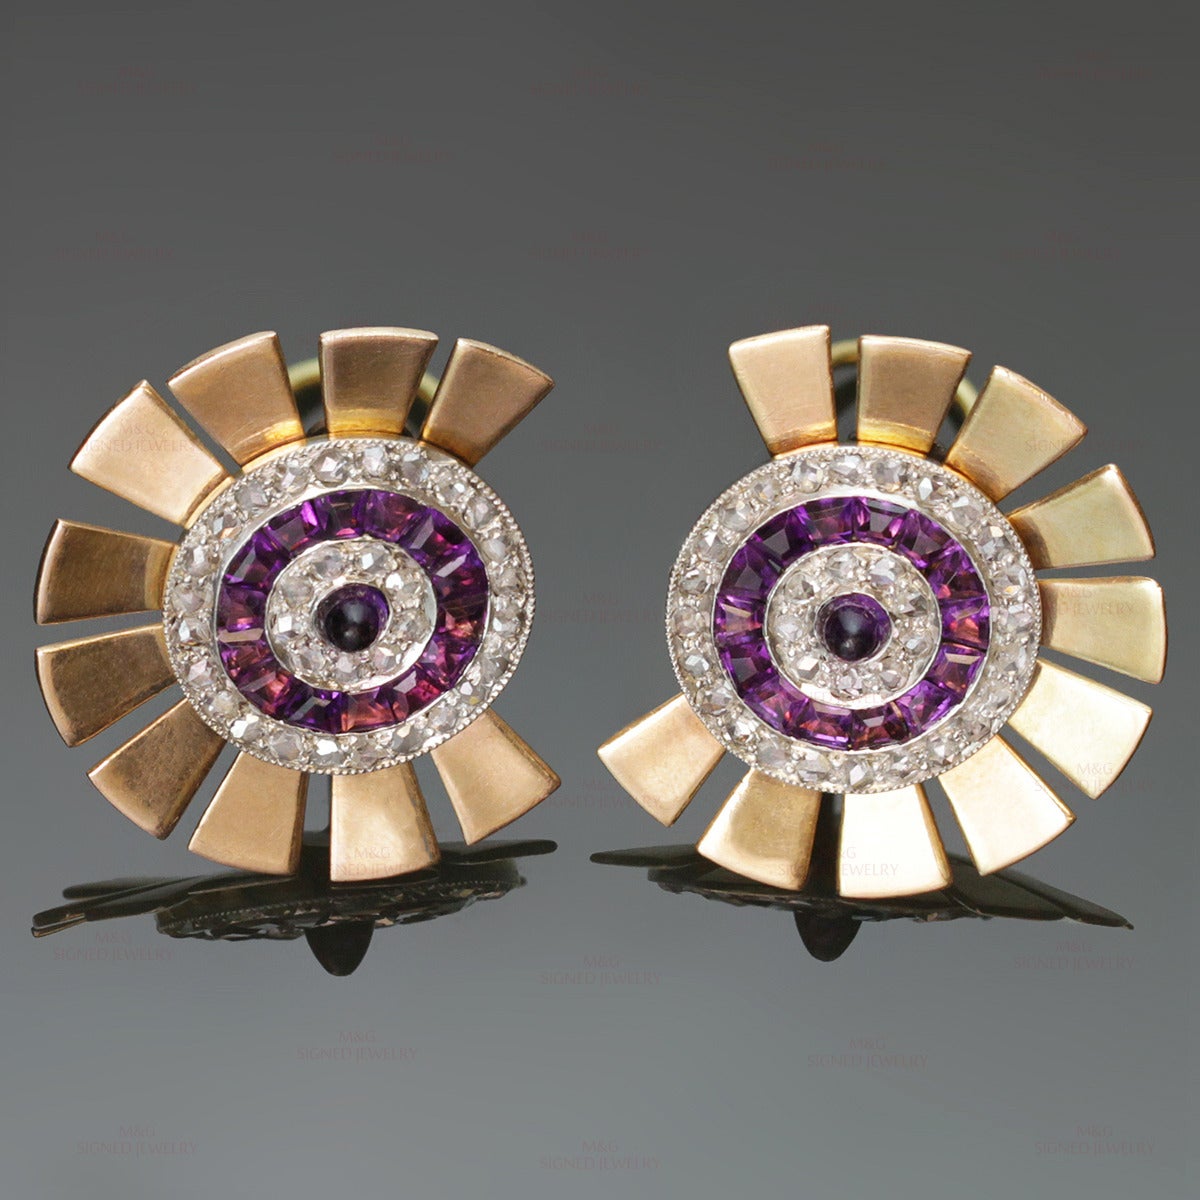 Circa 1940s, these stunning vintage earrings feature bullet and tapered baguette-cut amethyst stones - 3.10 carats - channel-set in platinum-topped 14k rose gold and enhanced by 1.90 carats of sparkling rose-cut diamonds. Completed by post and omega